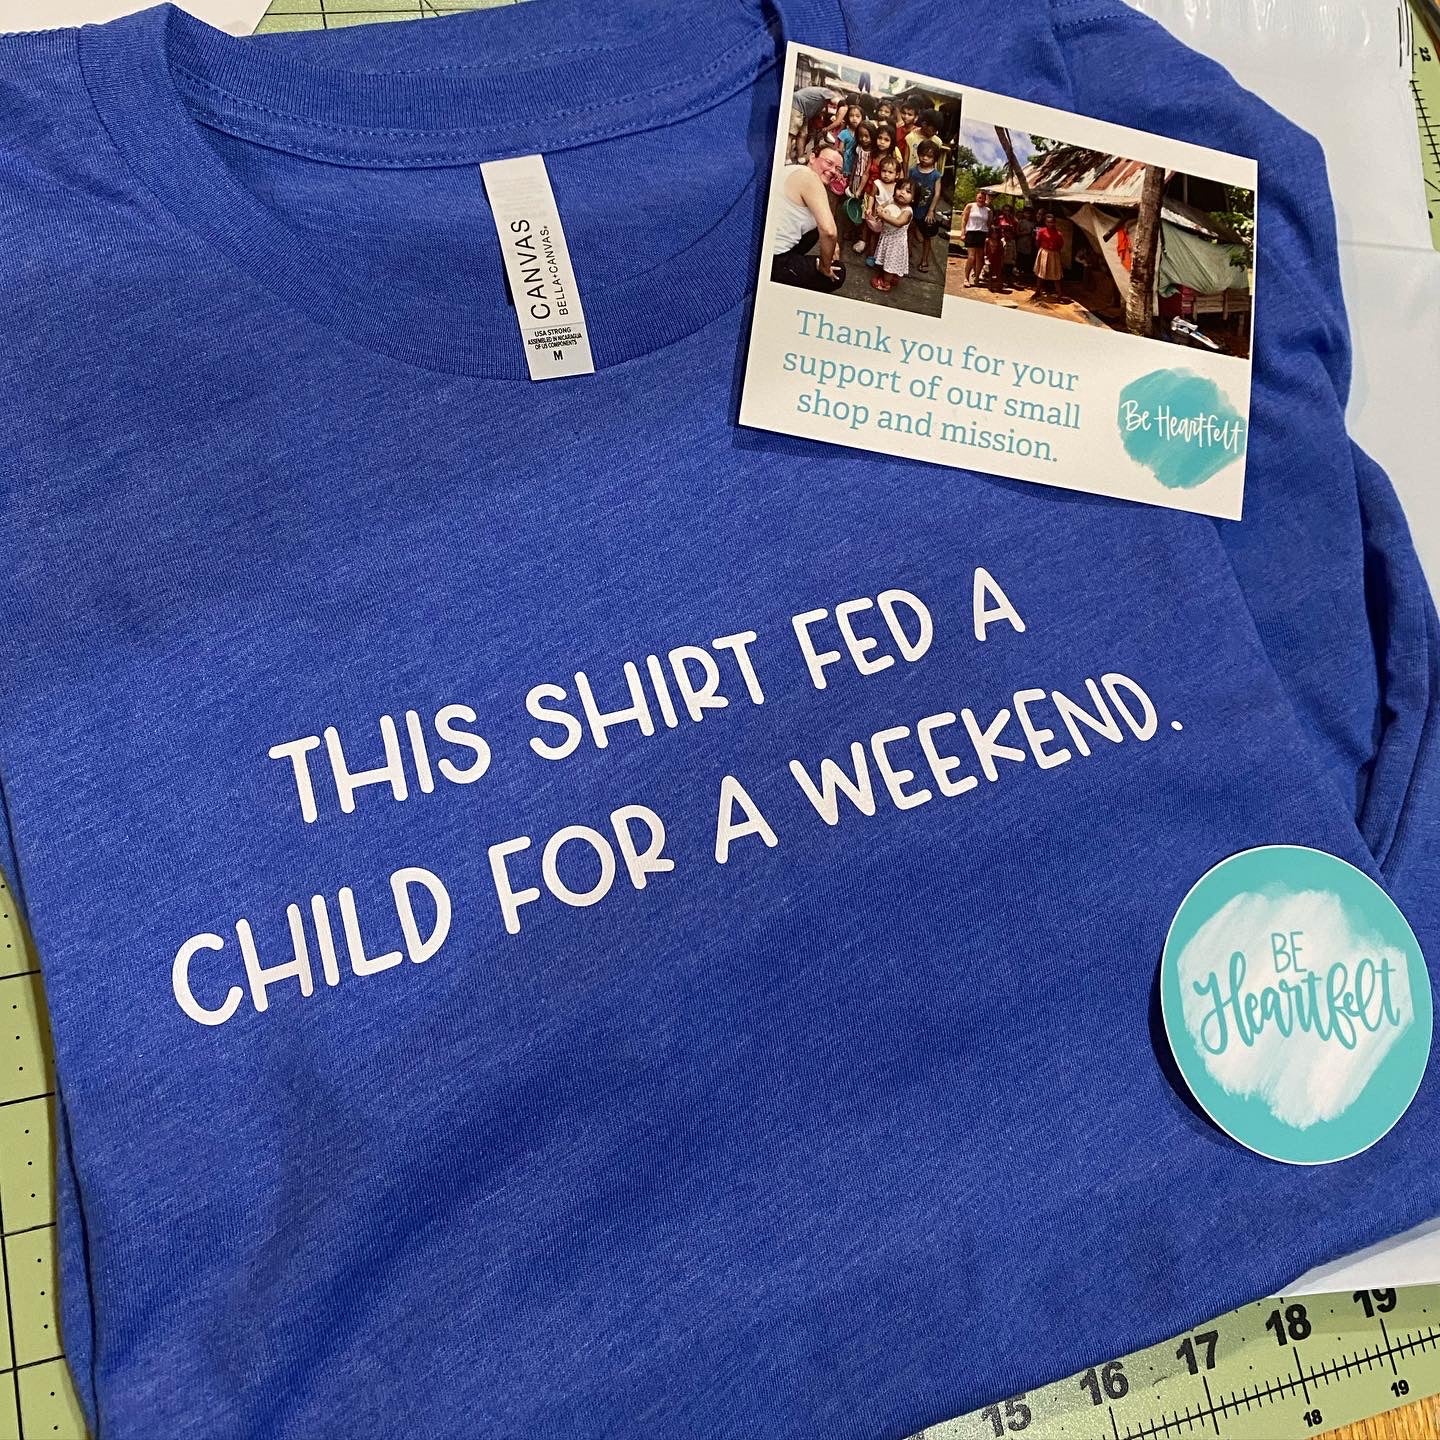 This Shirt Fed a Child for a Weekend Shirt